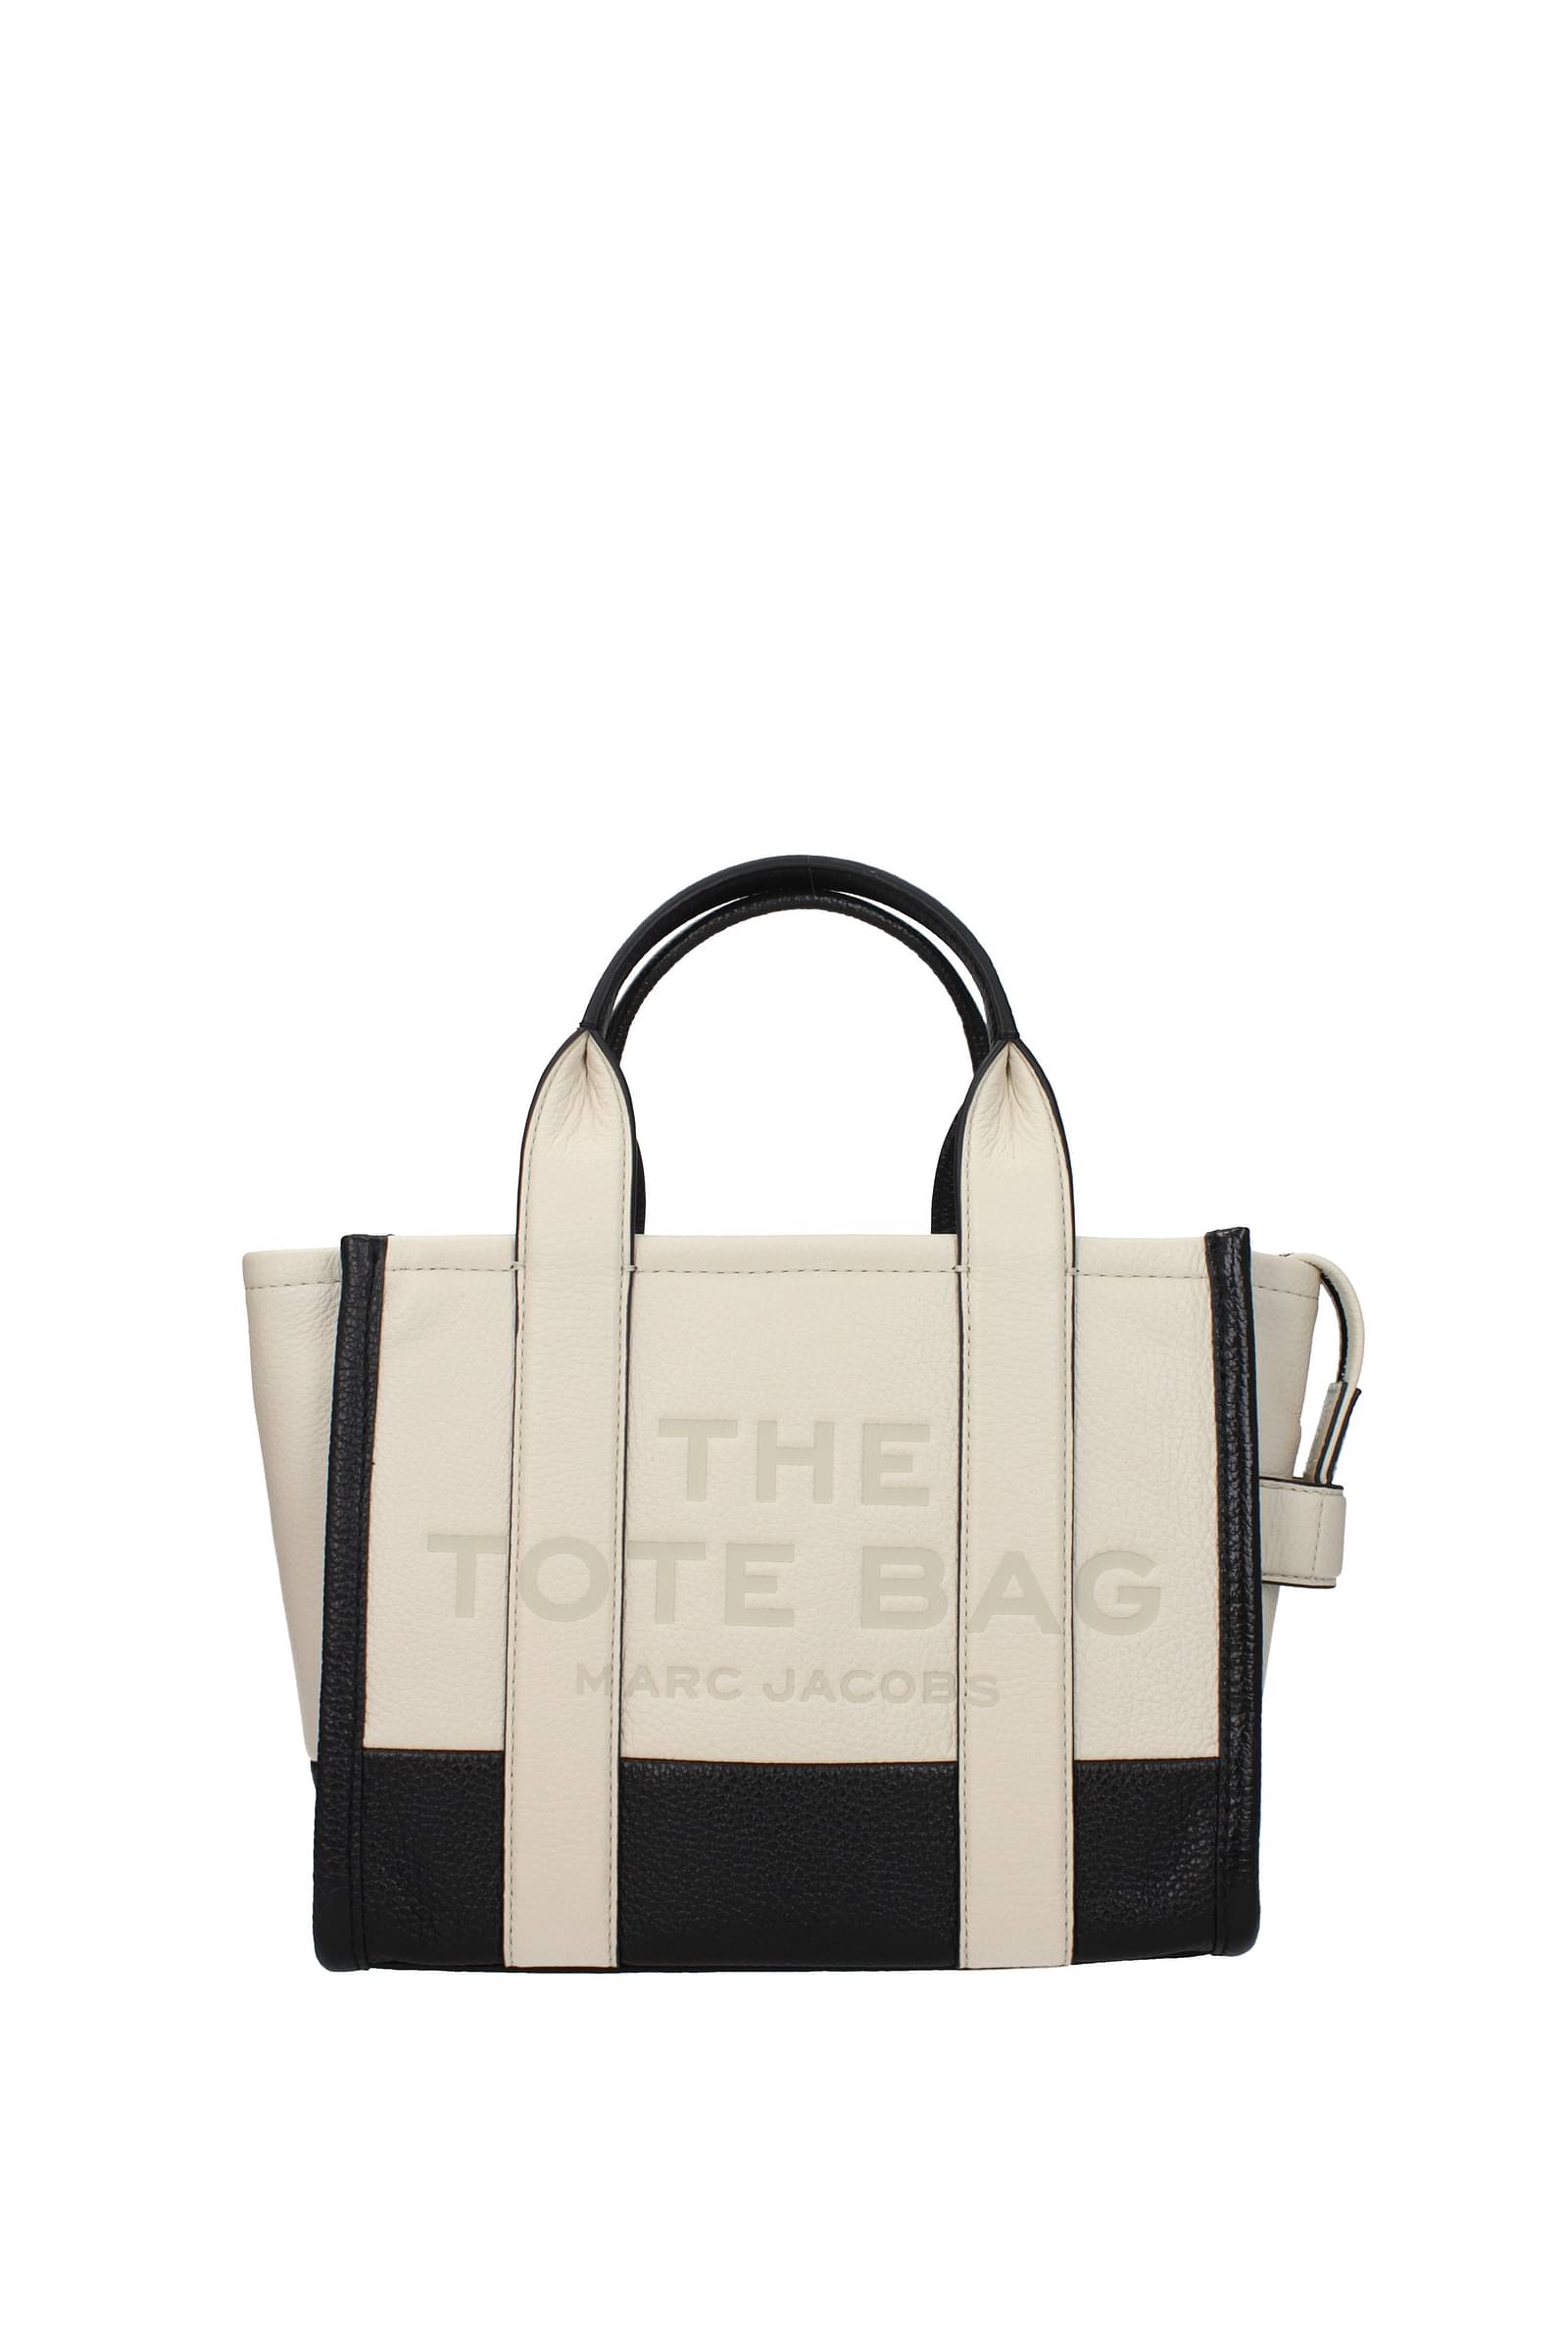 Marc Jacobs The Striped Small Tote Bag - Farfetch